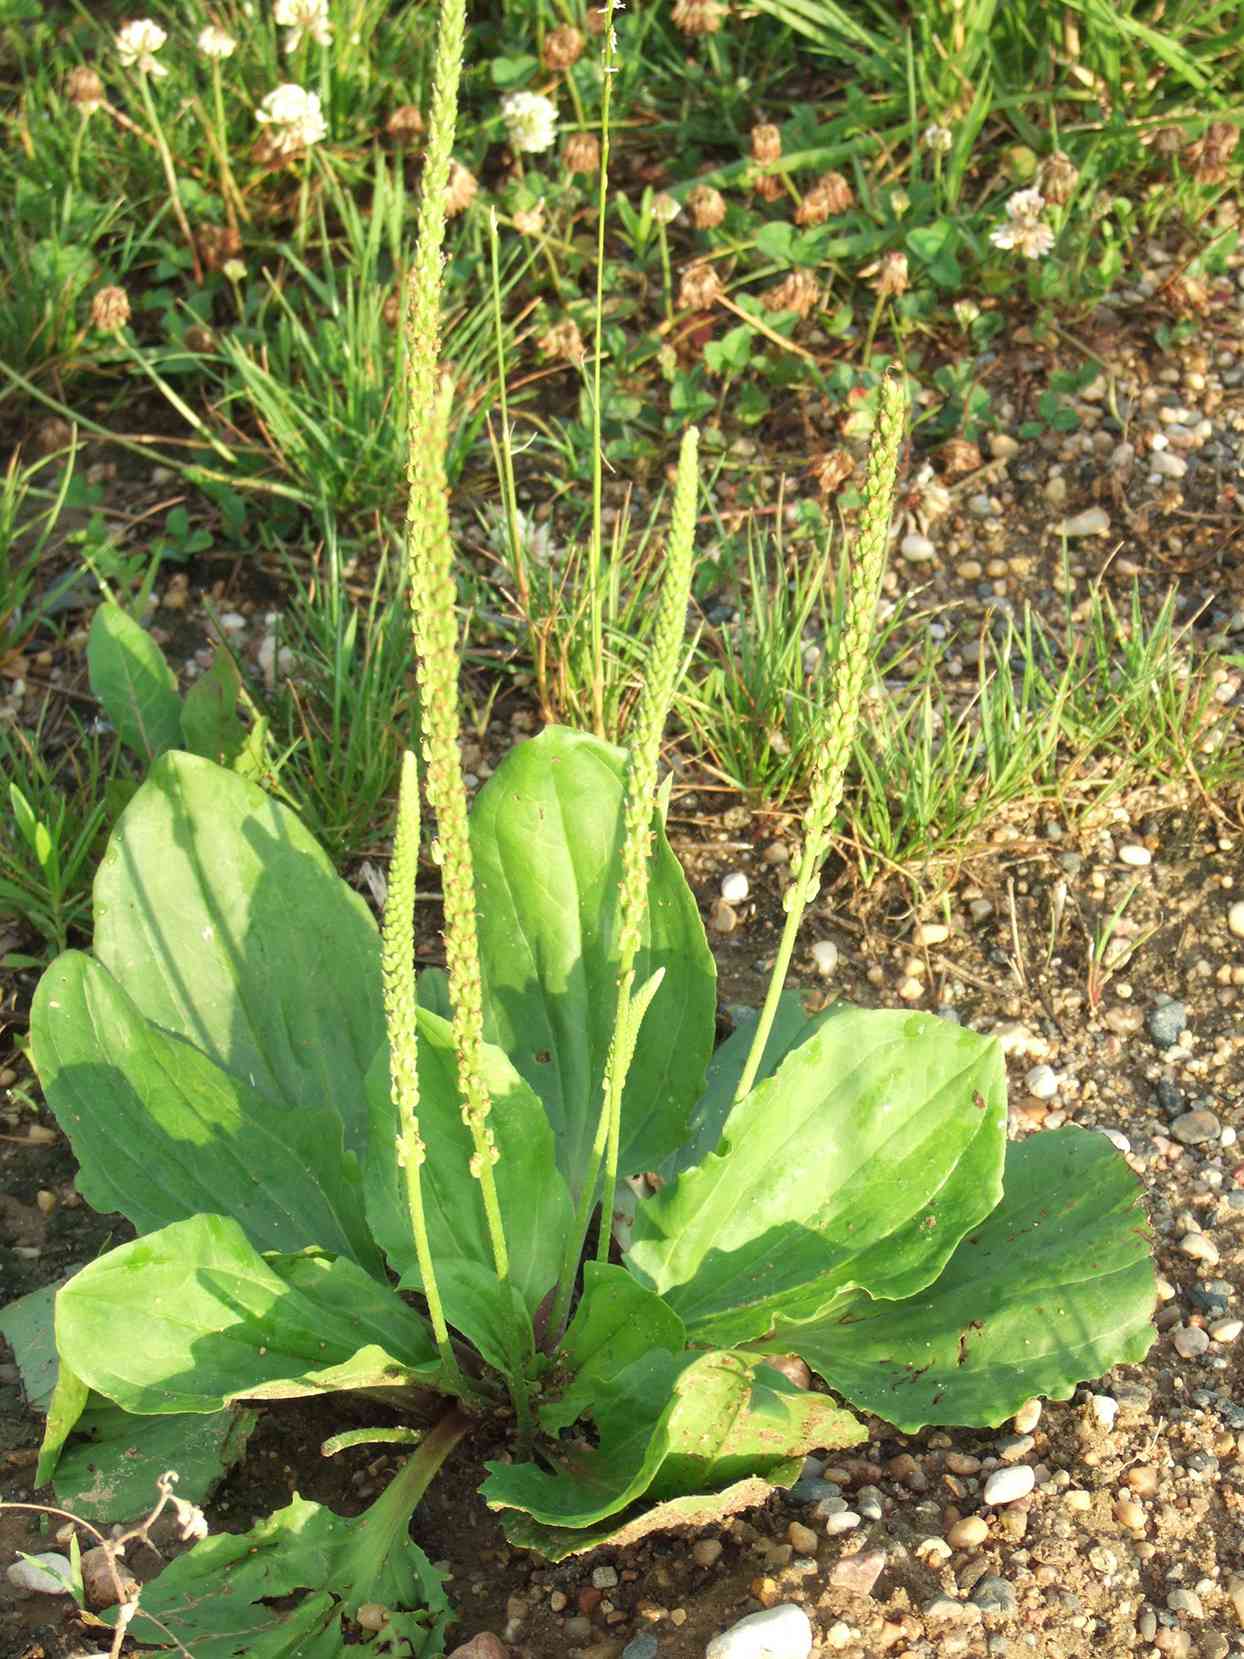 plantain weed growing outdoors